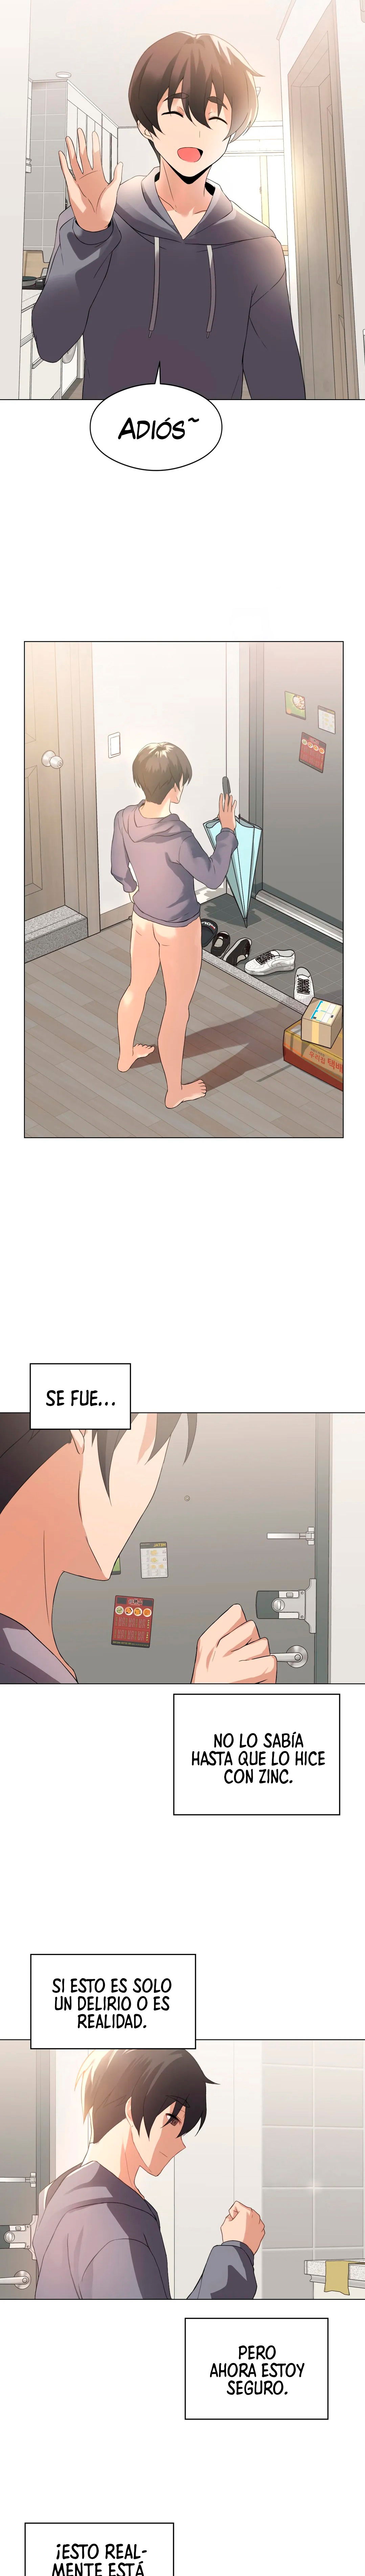 level-up-until-satisfy-raw-chap-3-17